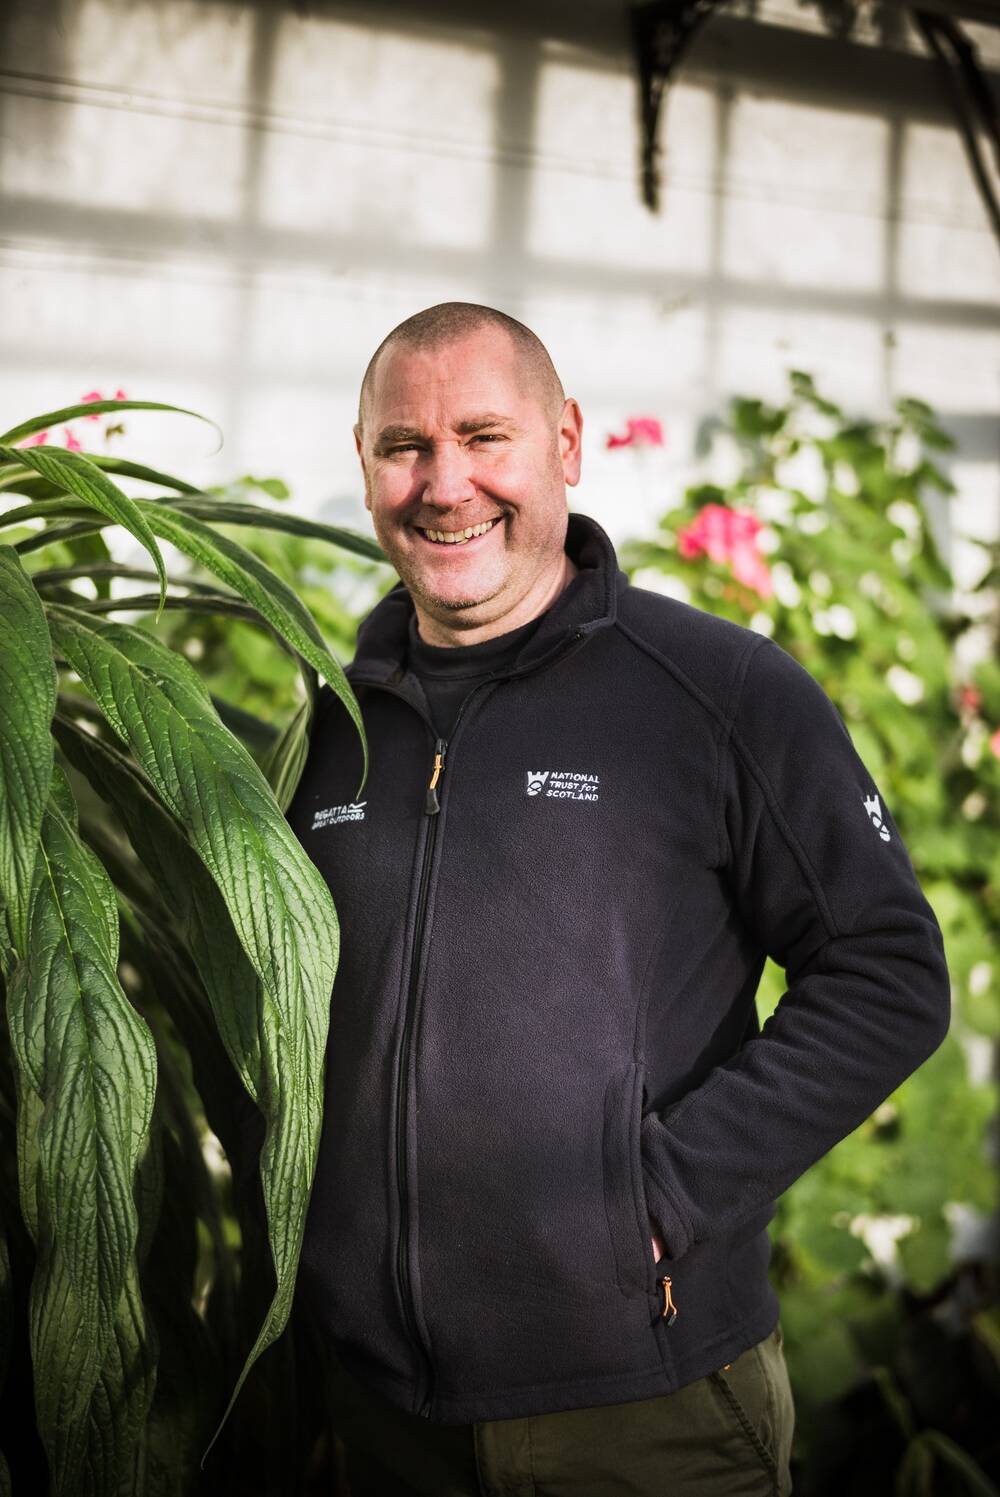 A smiling man in a navy National Trust for Scotland fleece stands inside a glasshouse, surrounded by plants.